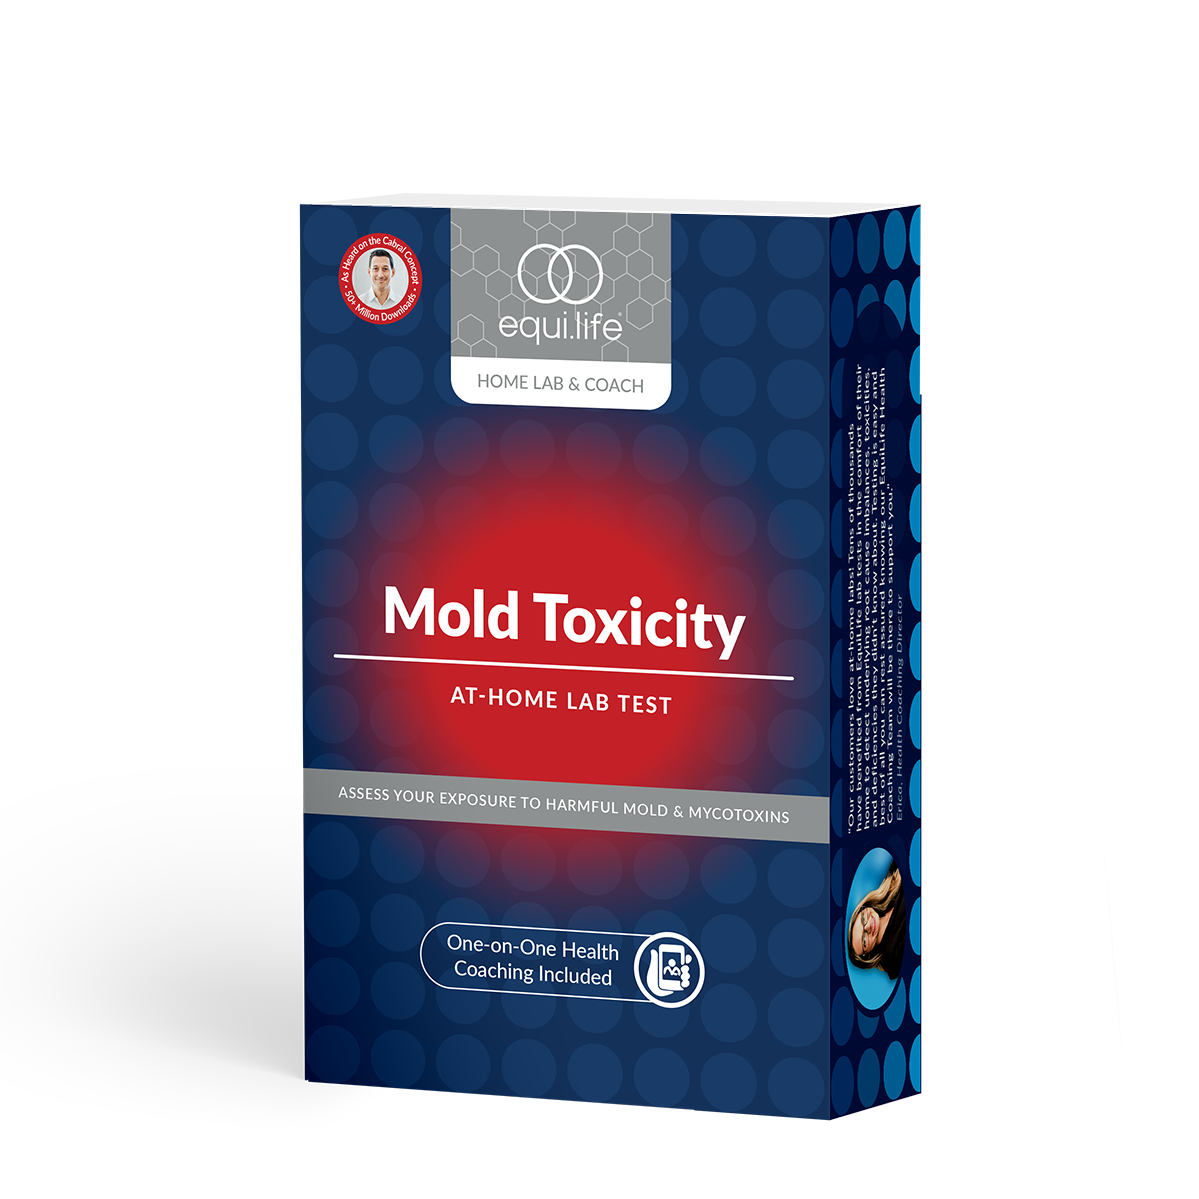 Mold Toxicity Test